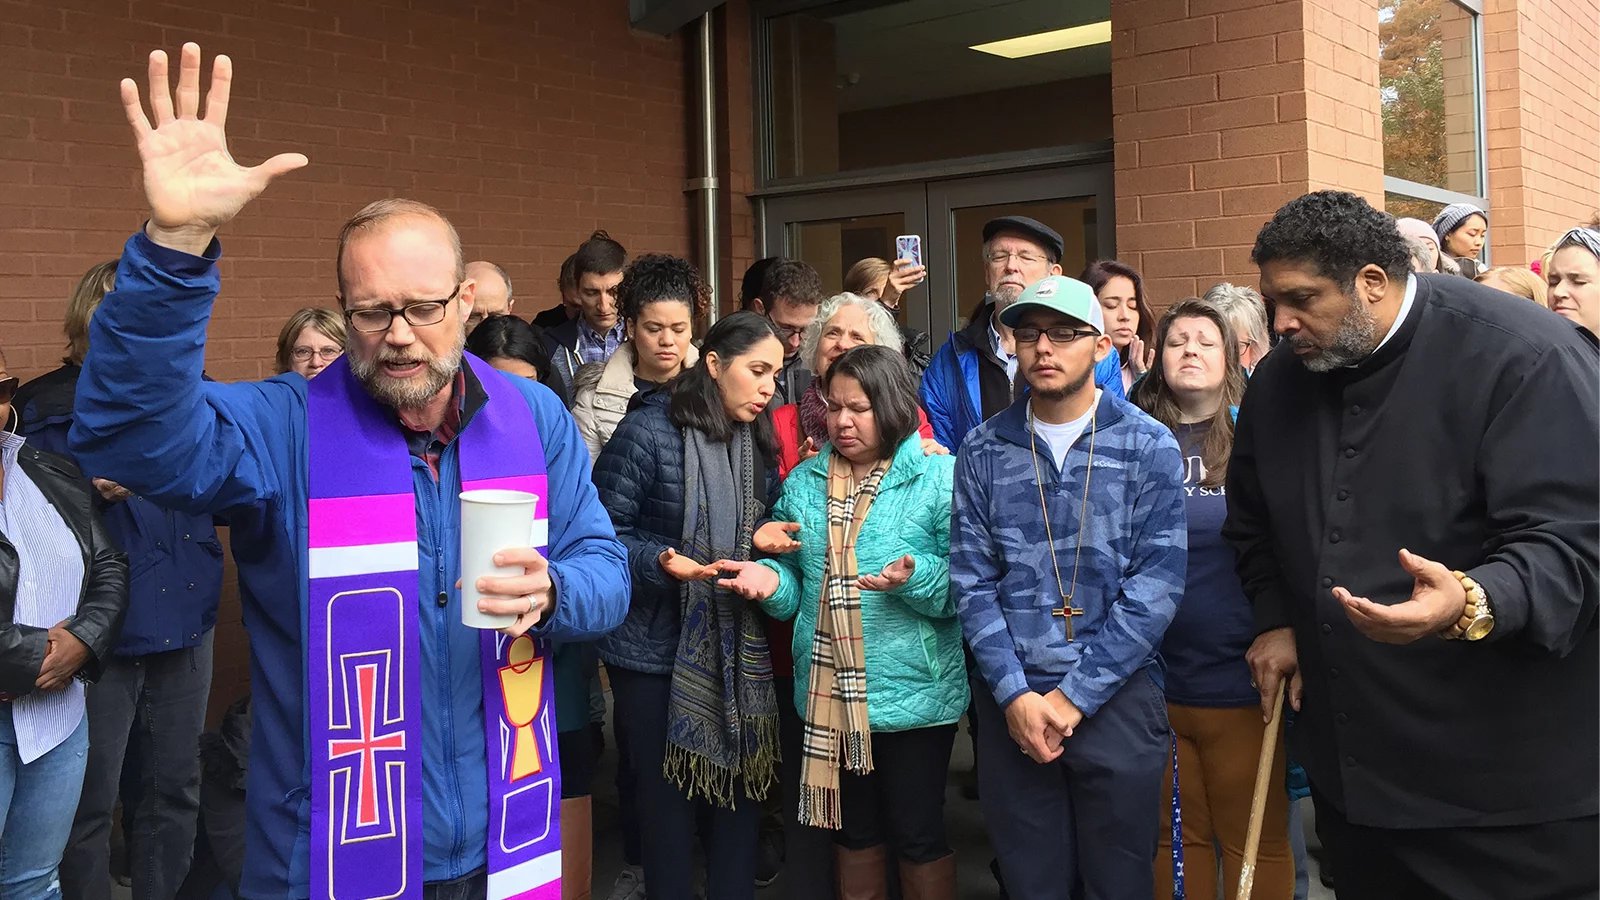 After Arrest of Protected Immigrant, Sanctuary Church Members Cry Out for  Justice - United Methodist Insight